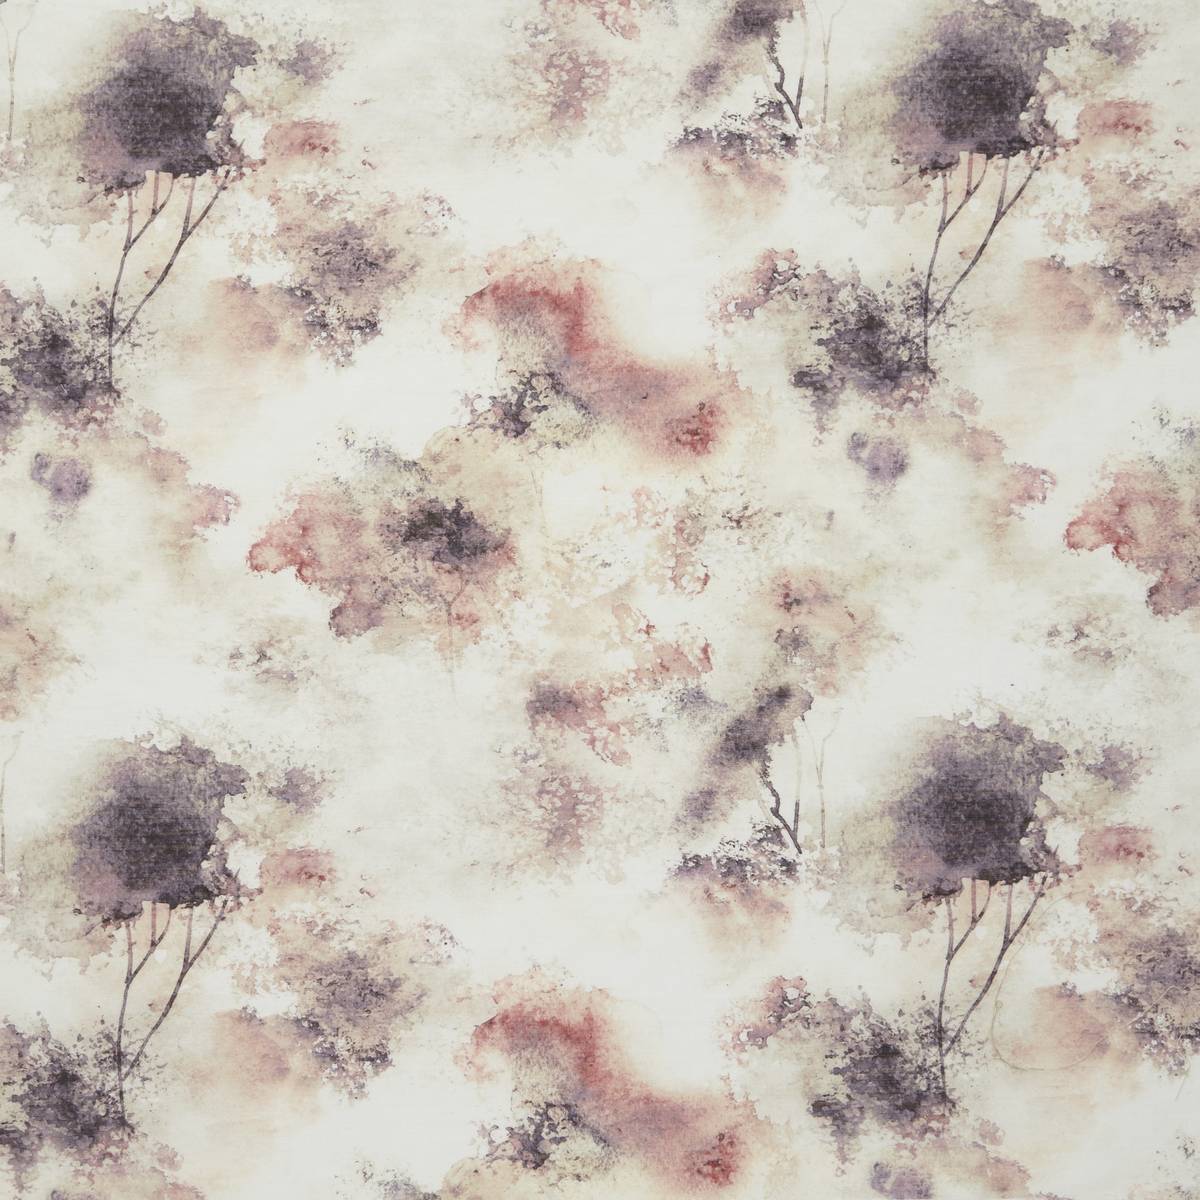 Caldera Voile Mulberry Fabric by iLiv